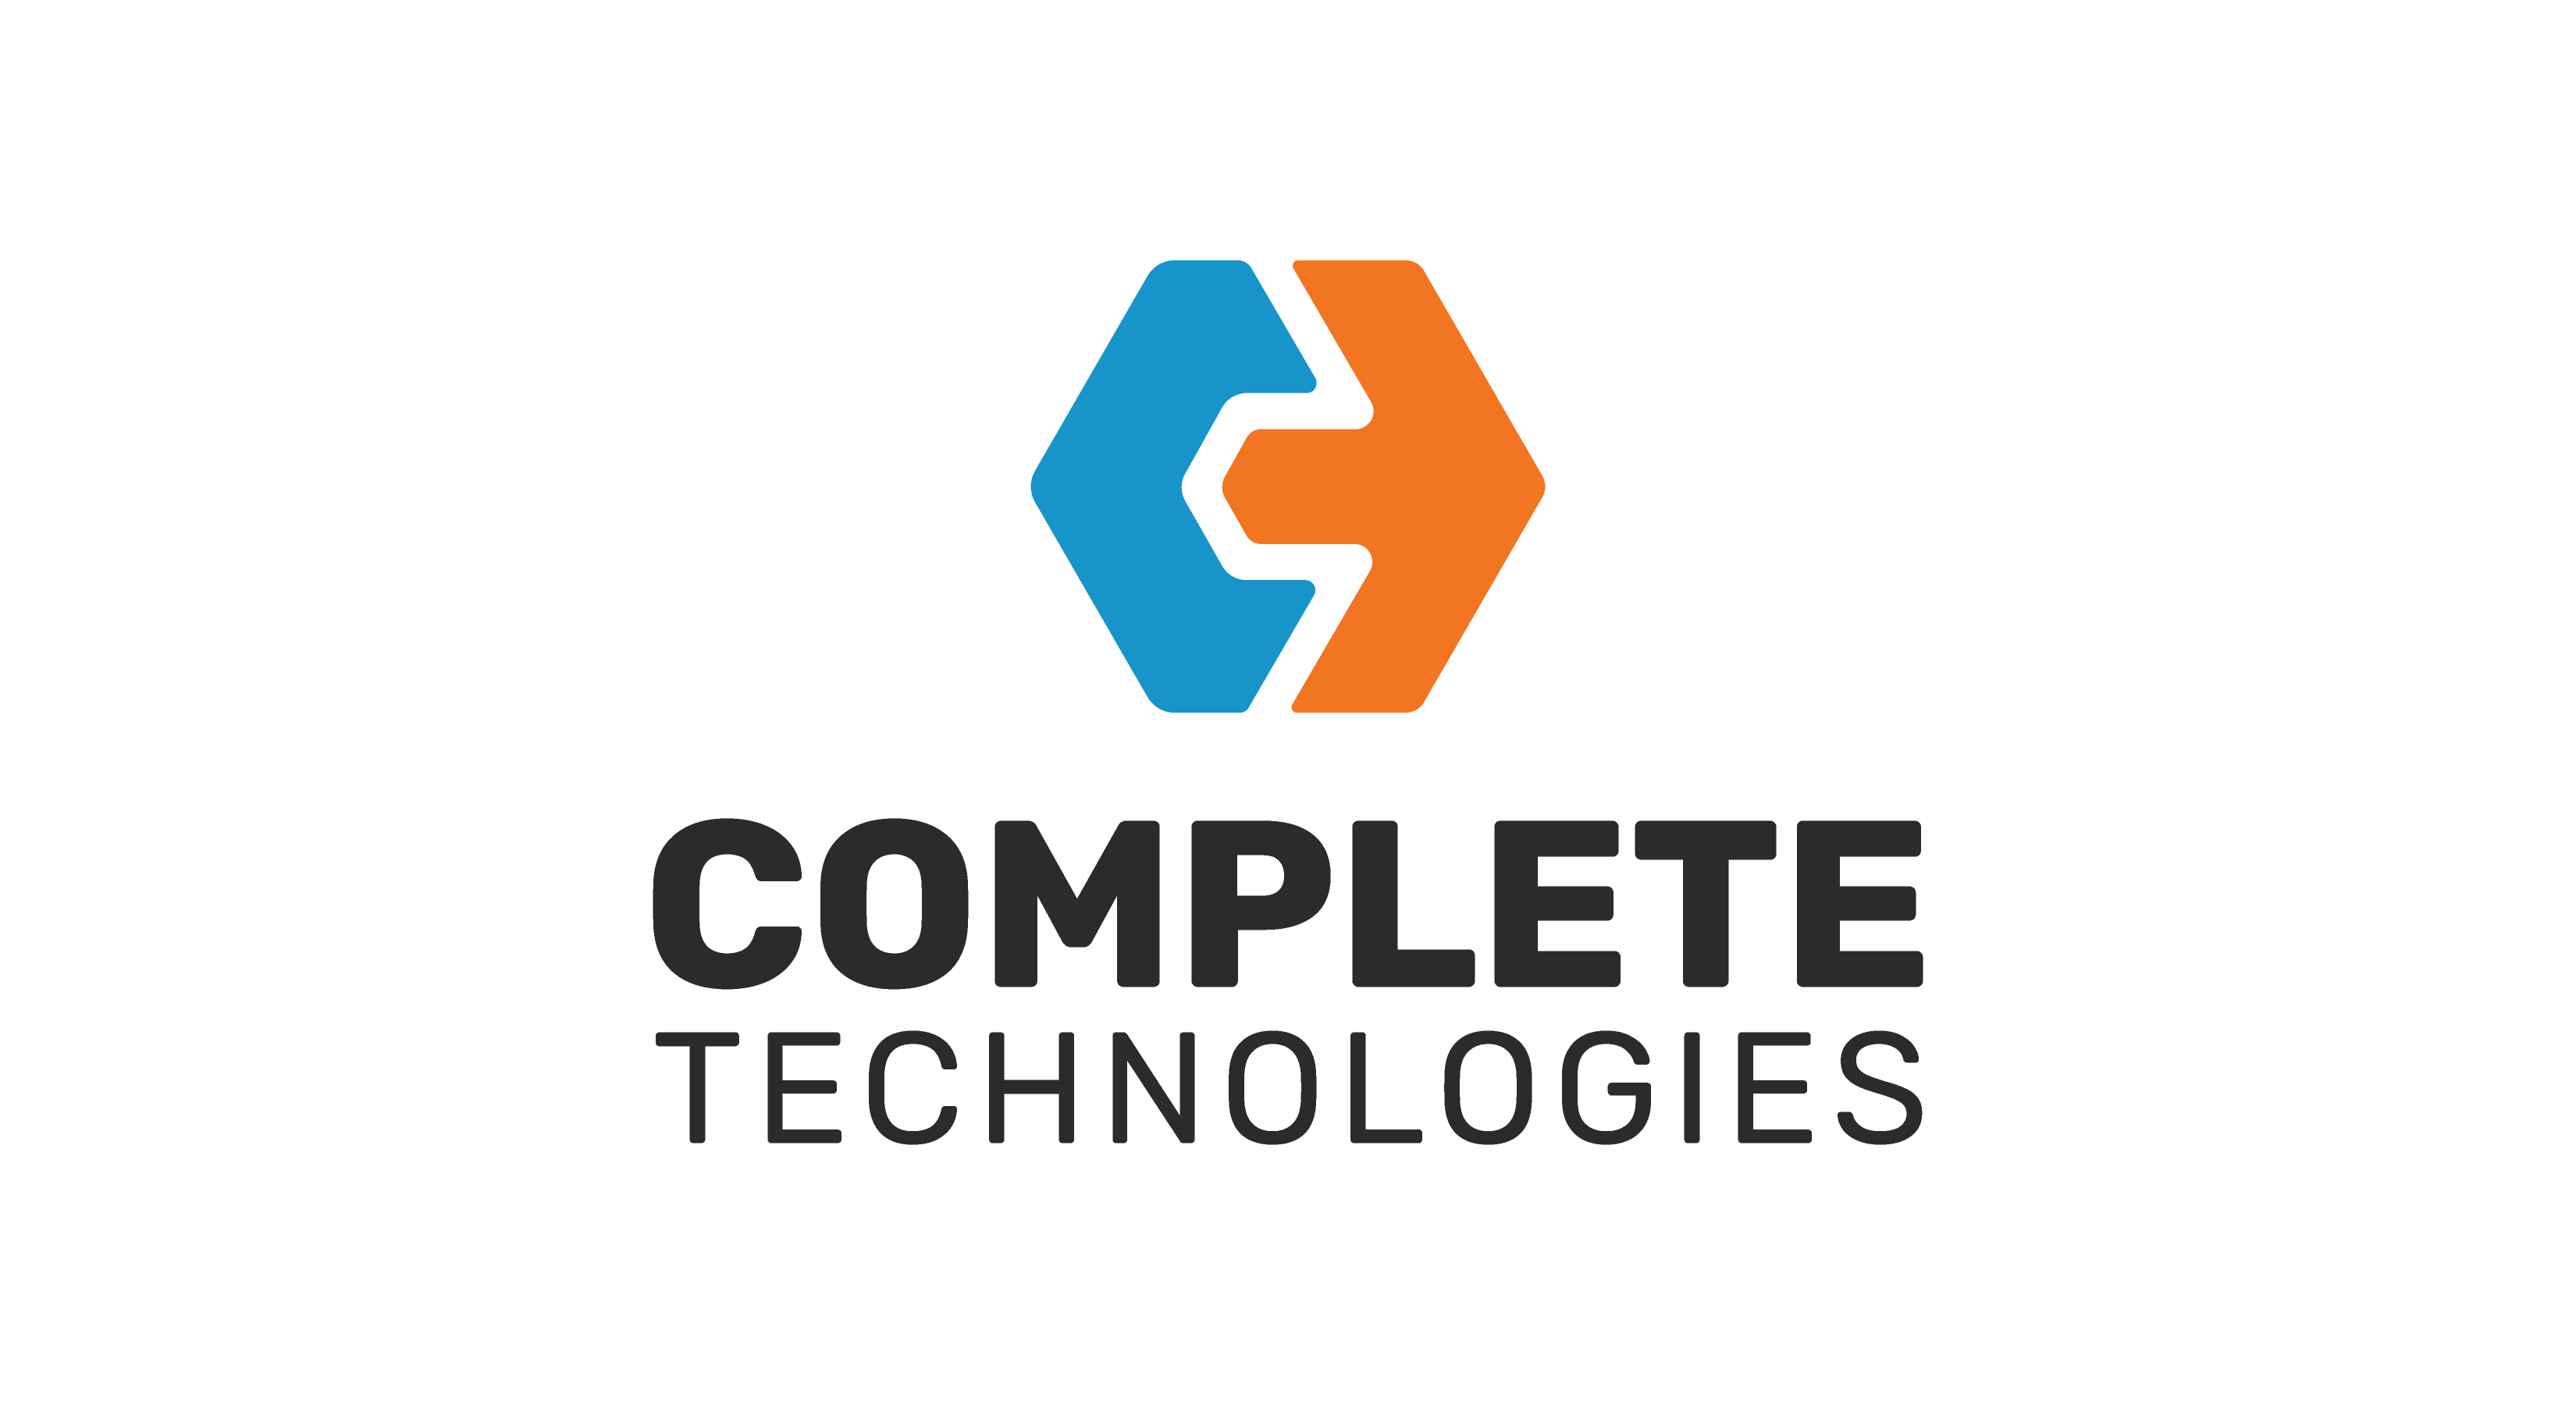 Complete Technologies profile on Qualified.One